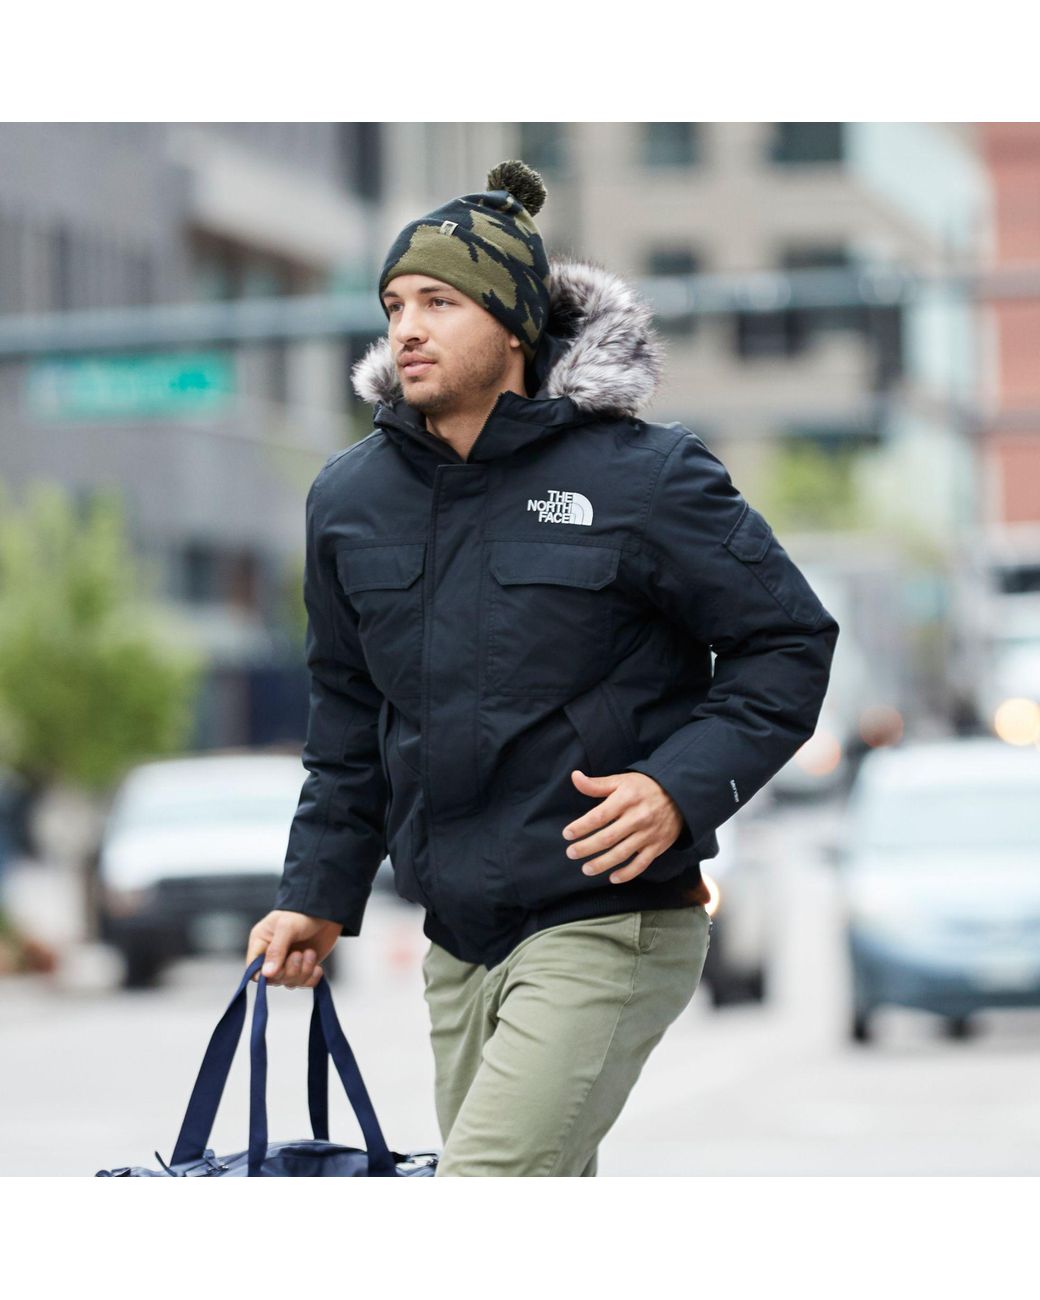 The North Face Gotham Iii Down Jacket in Black for Men - Save 34% - Lyst